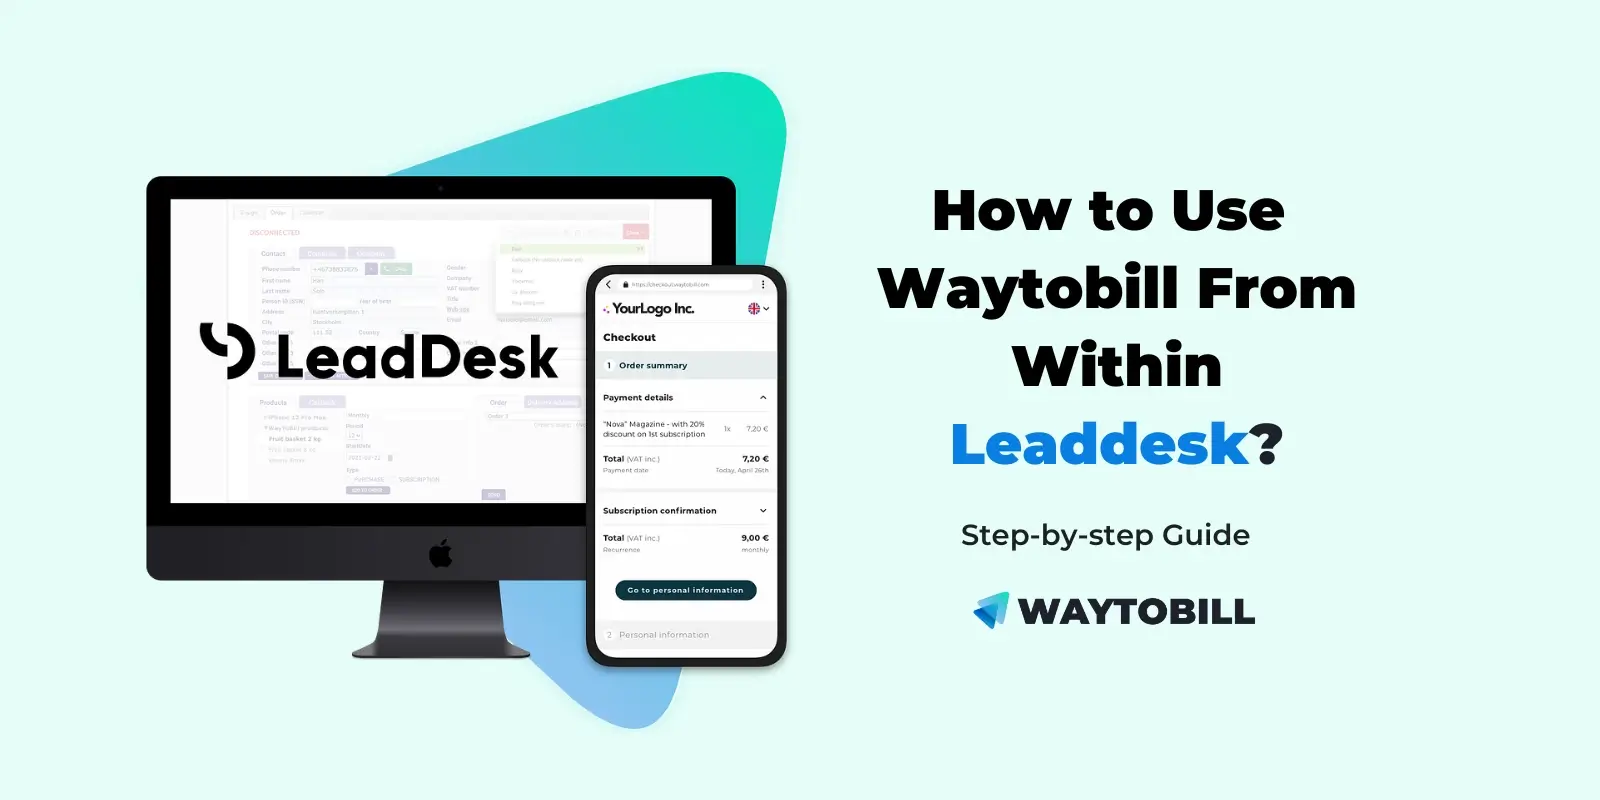 How to Use Waytobill’s Payment Plugin From Within Leaddesk - Guide